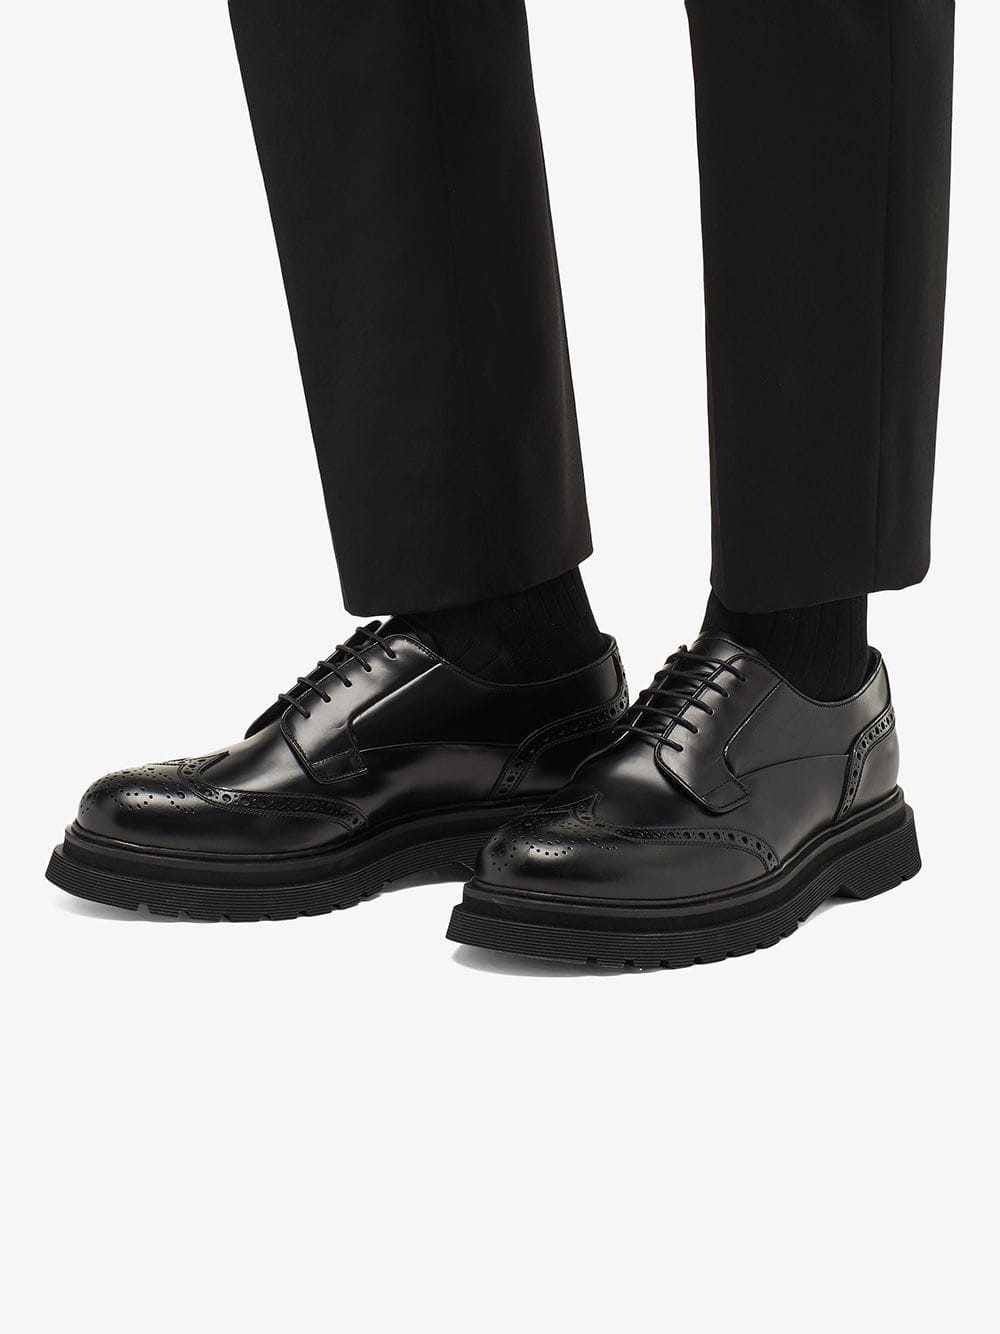 prada LACE UP SHOES available on 